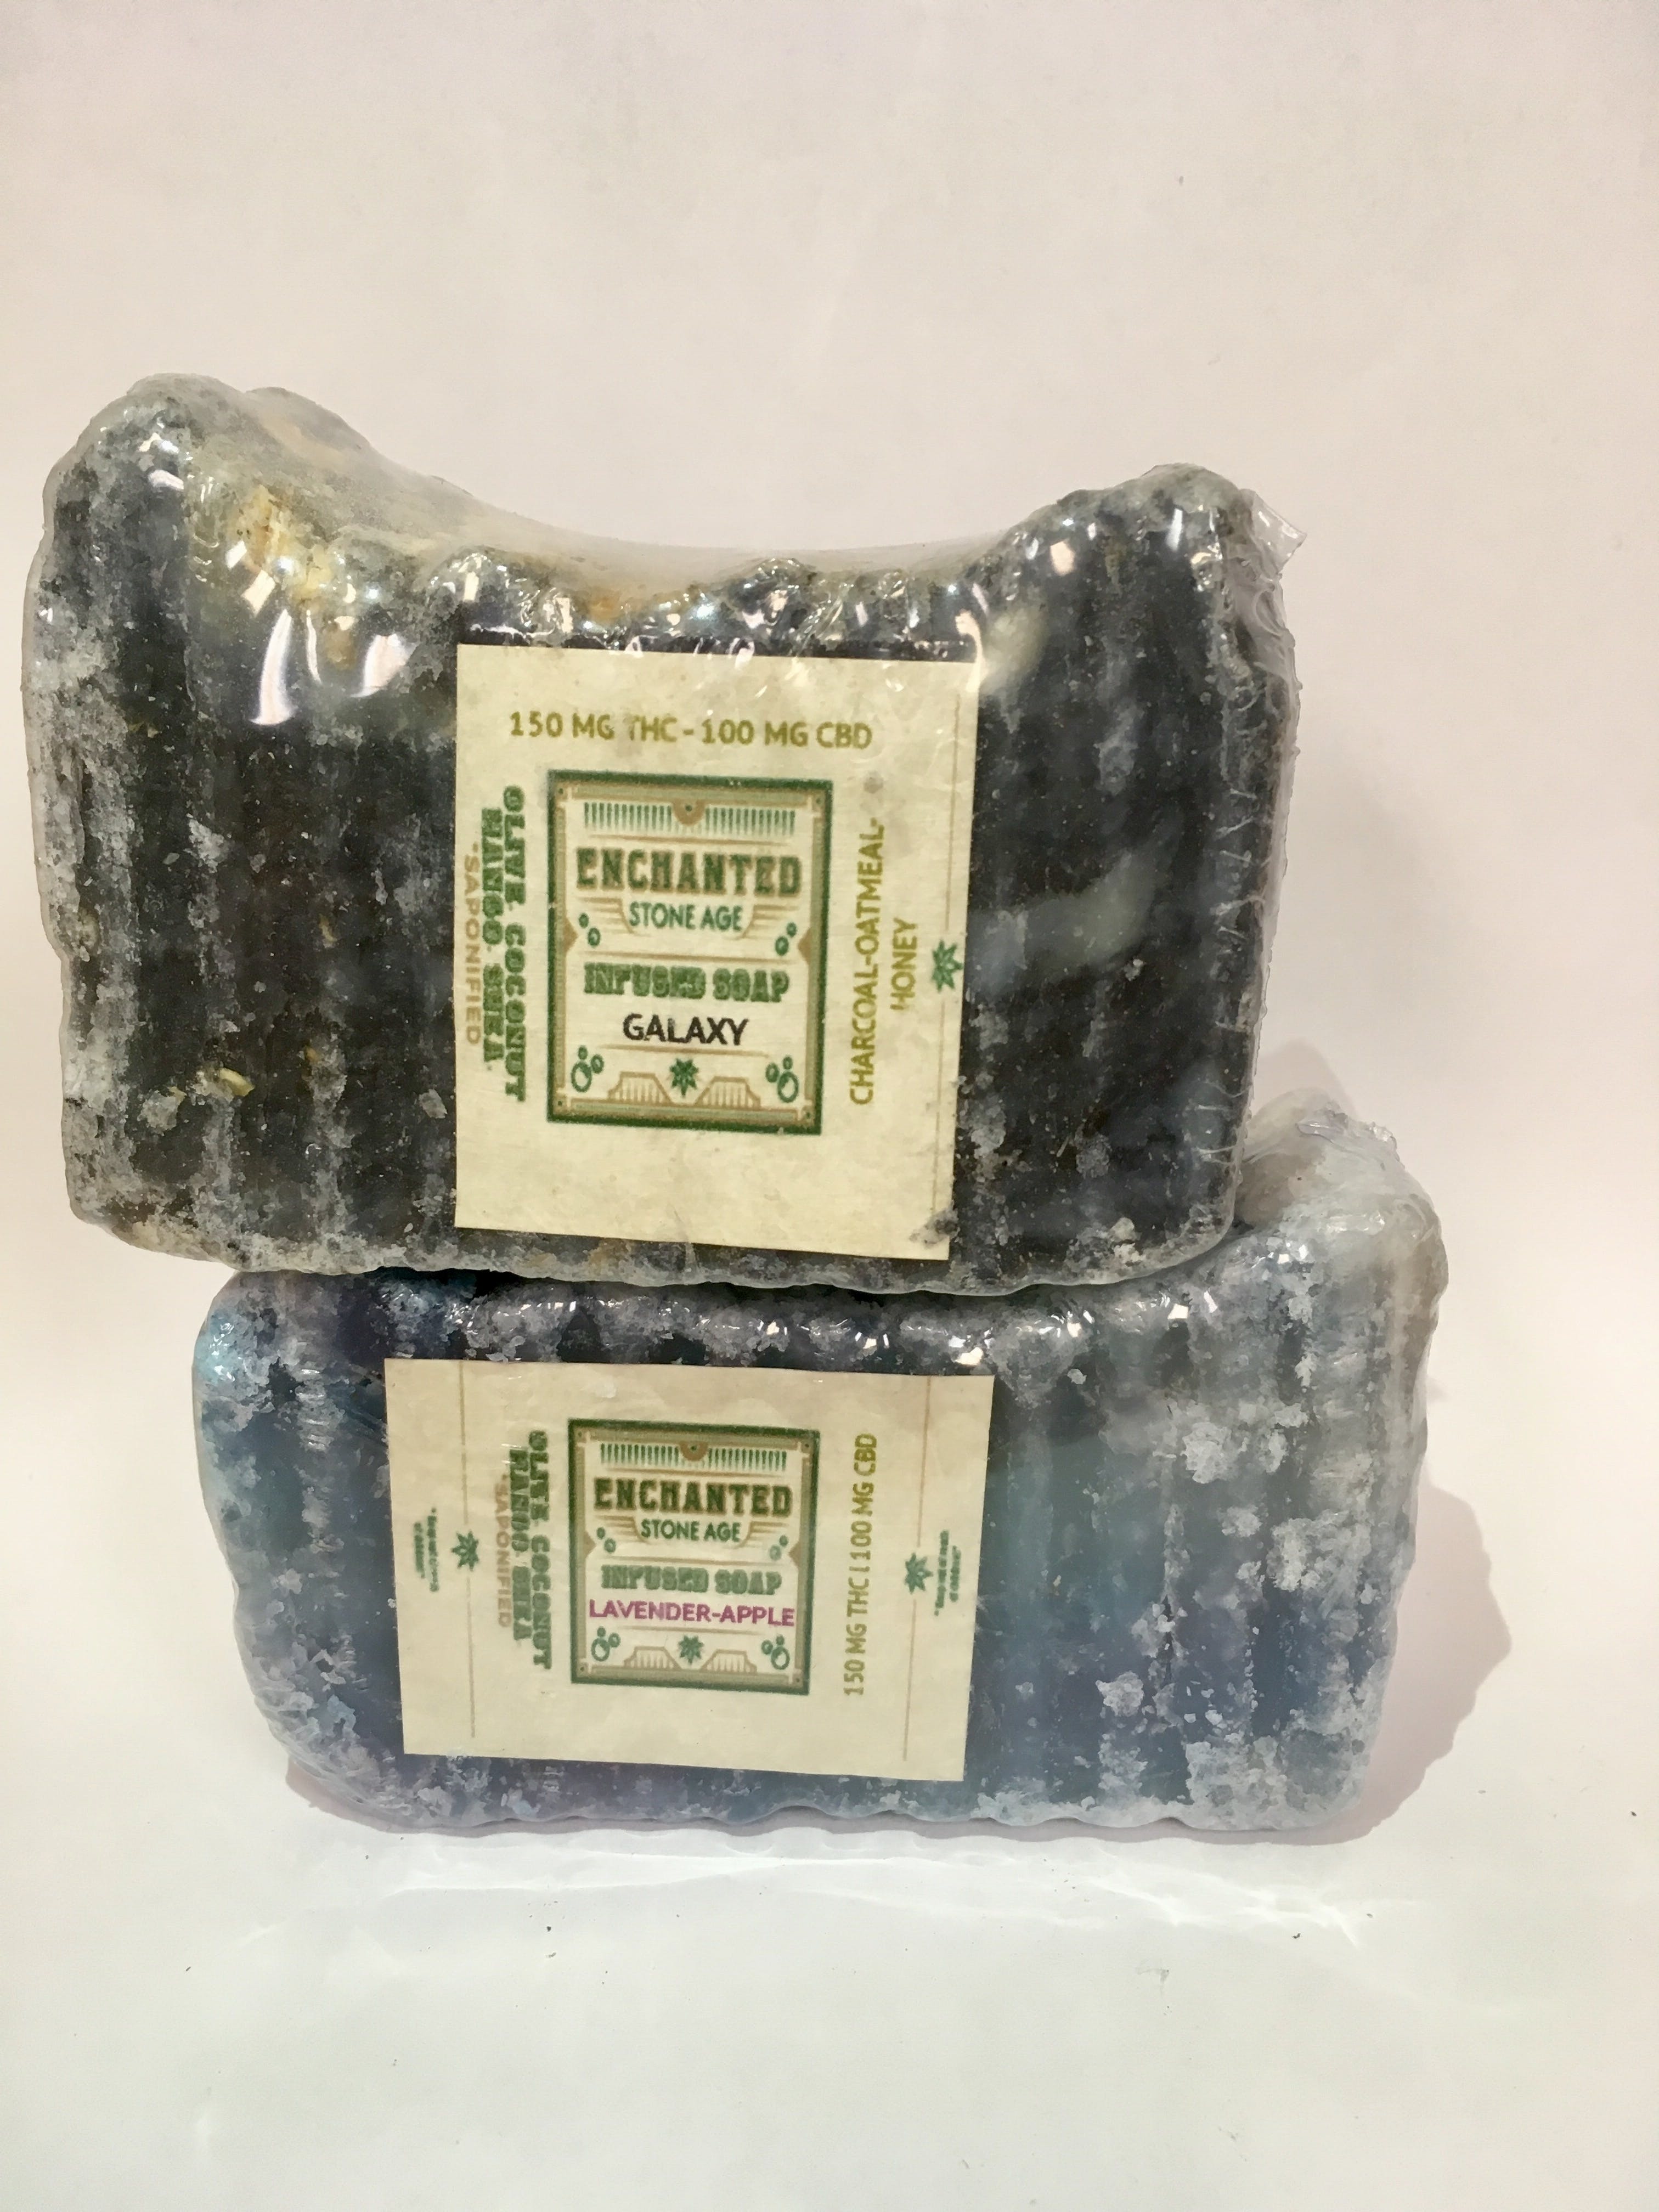 topicals-enchanted-stone-age-cbd-infused-soap